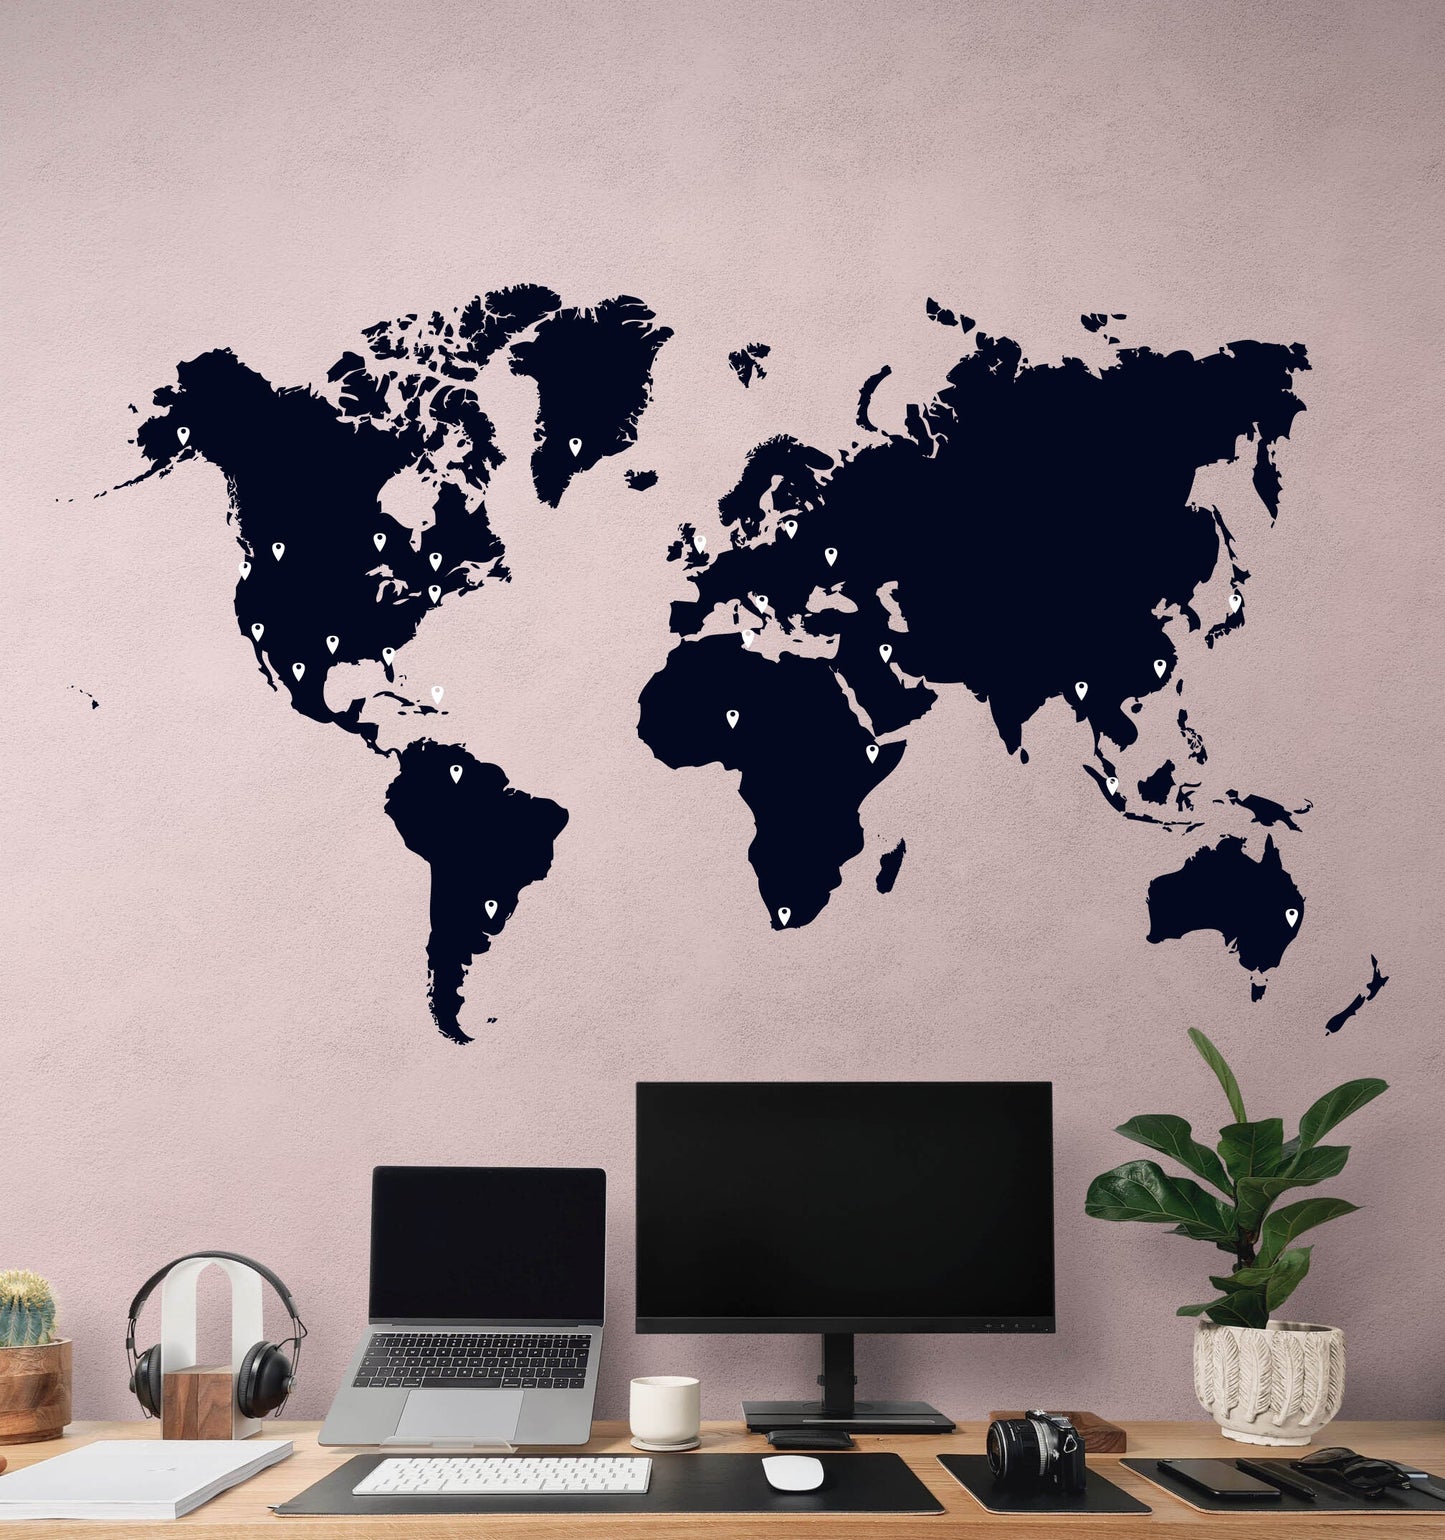 Office wall adorned with black world map decal.